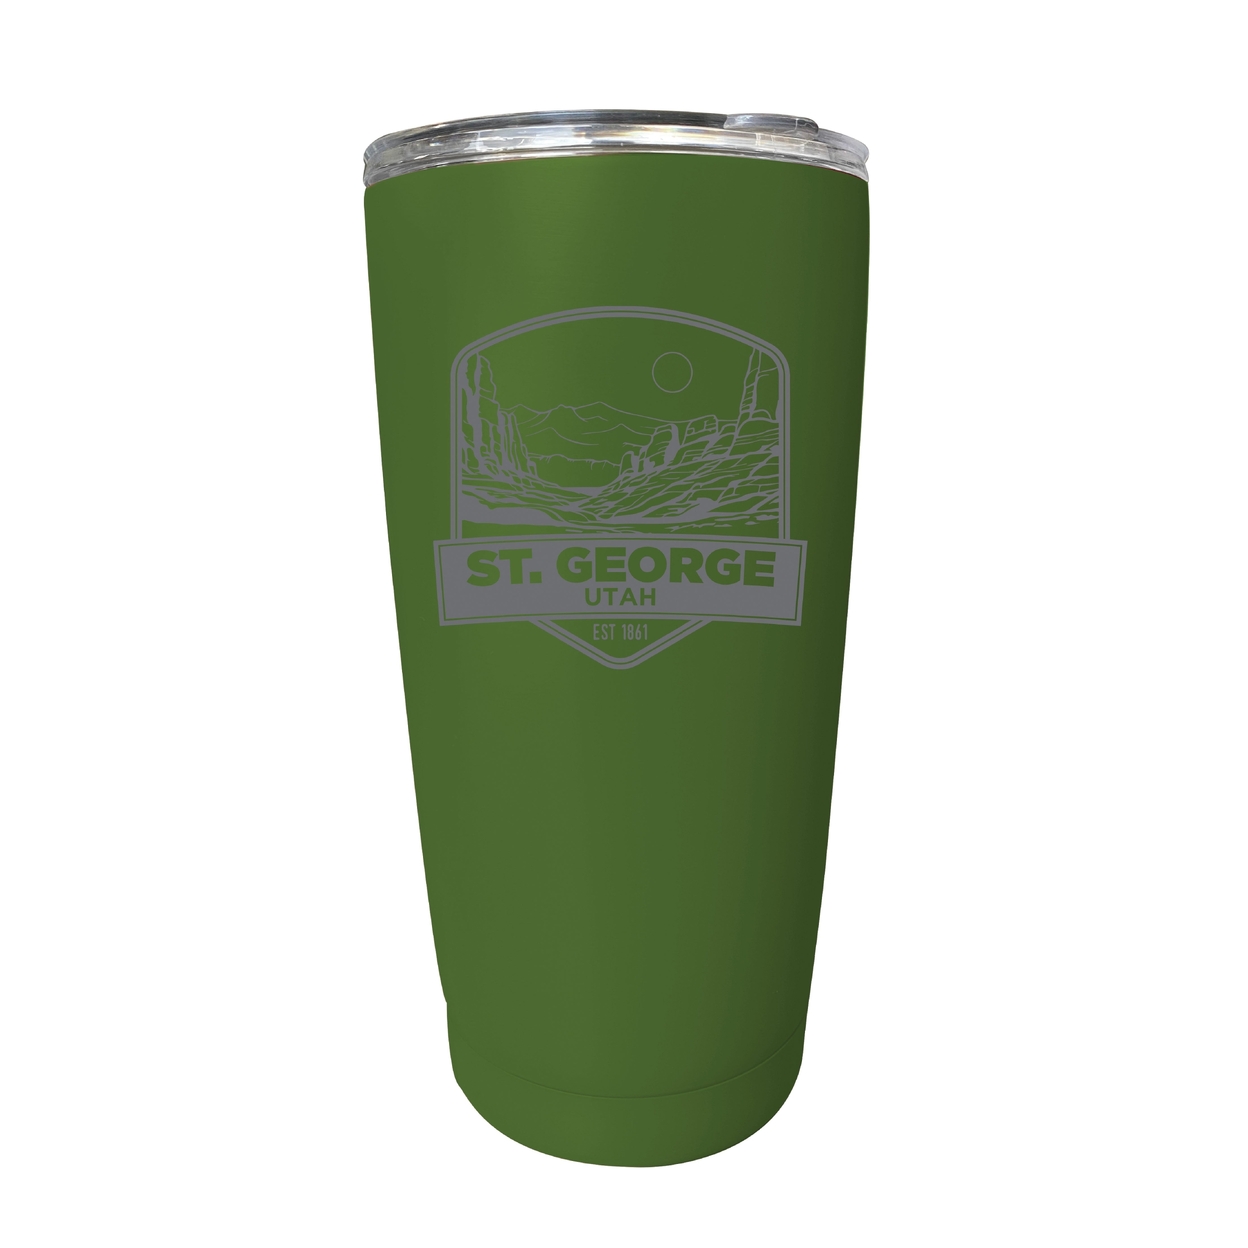 St. George Utah Souvenir 16 Oz Engraved Stainless Steel Insulated Tumbler - Green,,4-Pack